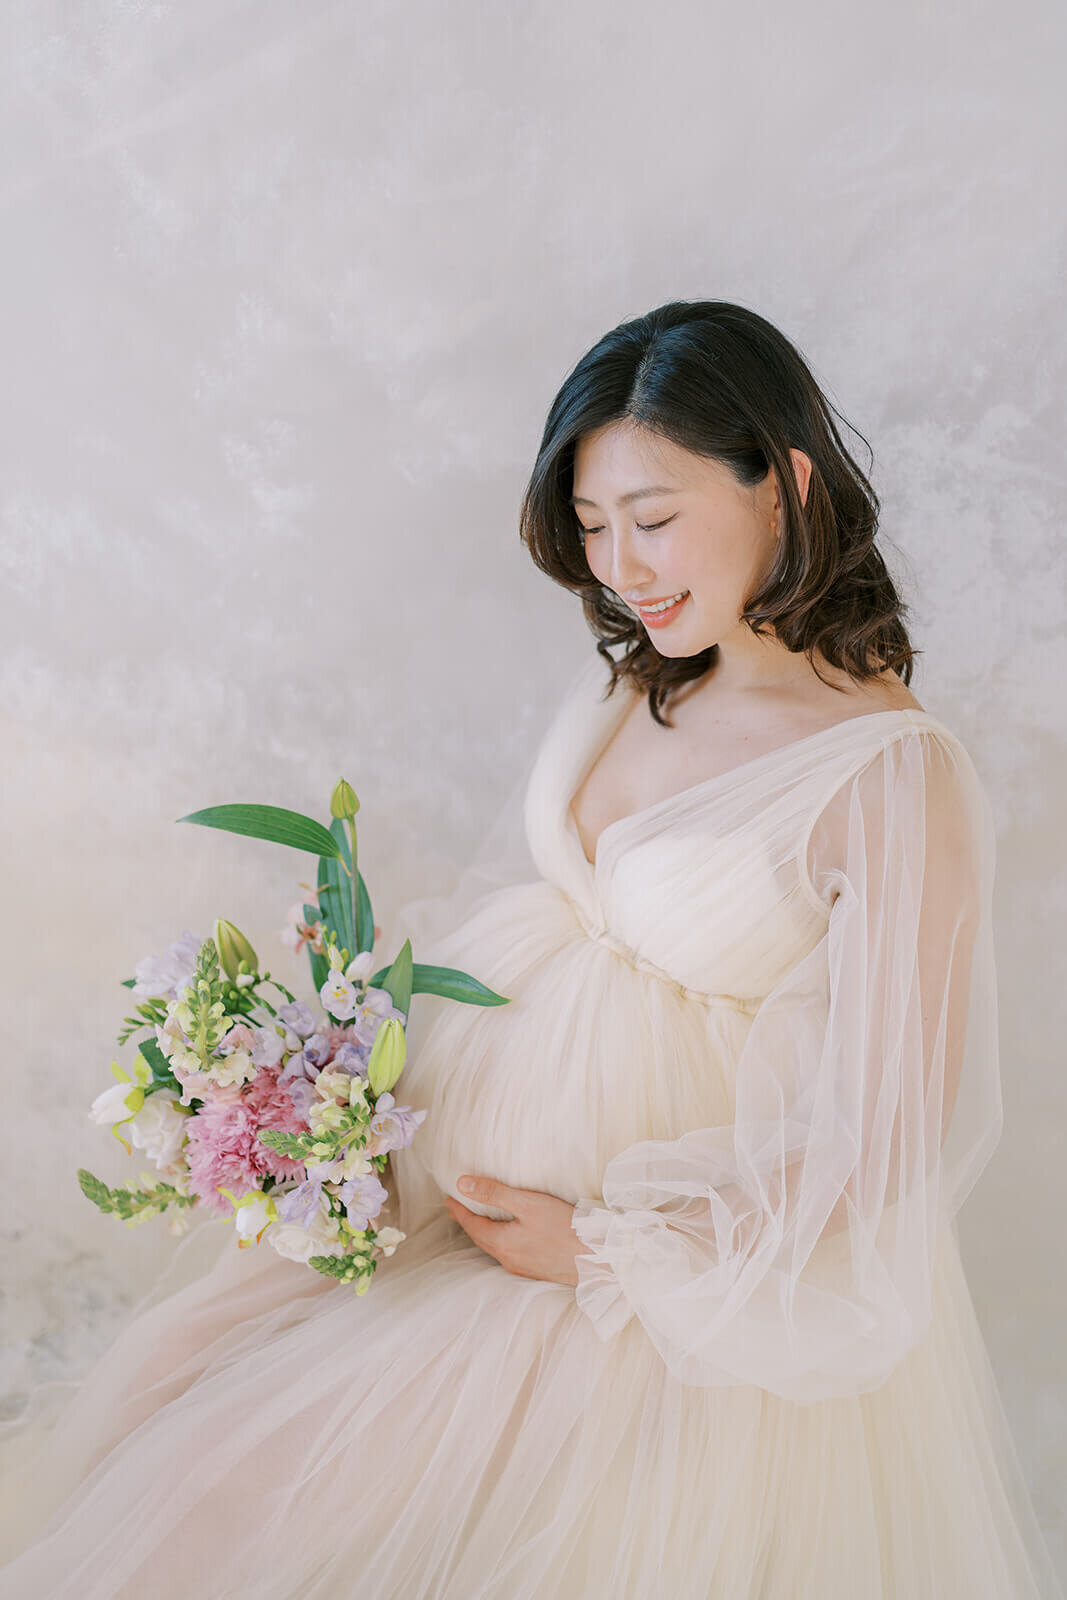 Cherish the glow of an expectant Chinese descent mum in a stunning cream tulle gown, capturing maternity magic at a Gold Coast studio